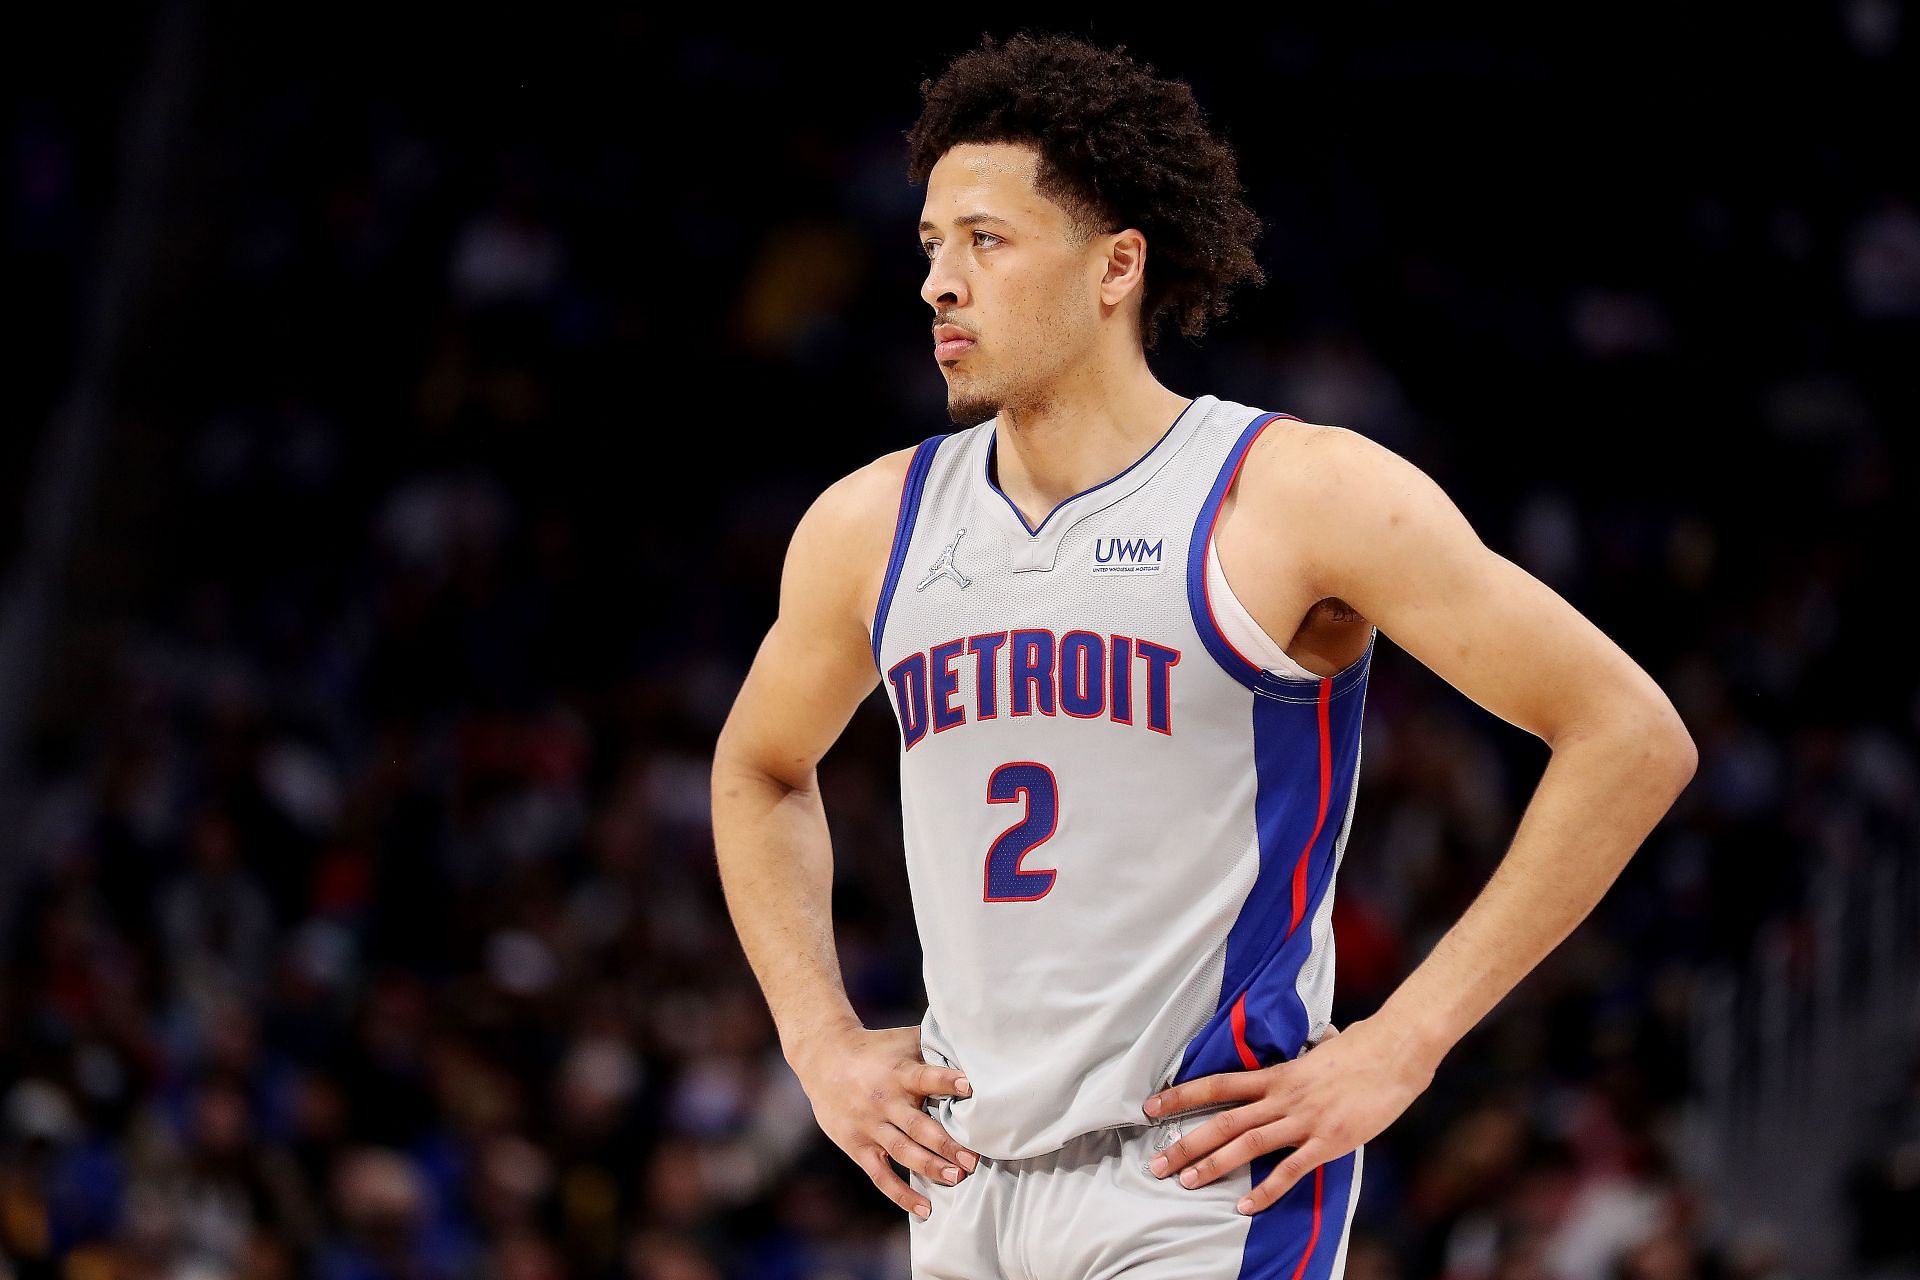 Cade Cunningham of the Detroit Pistons